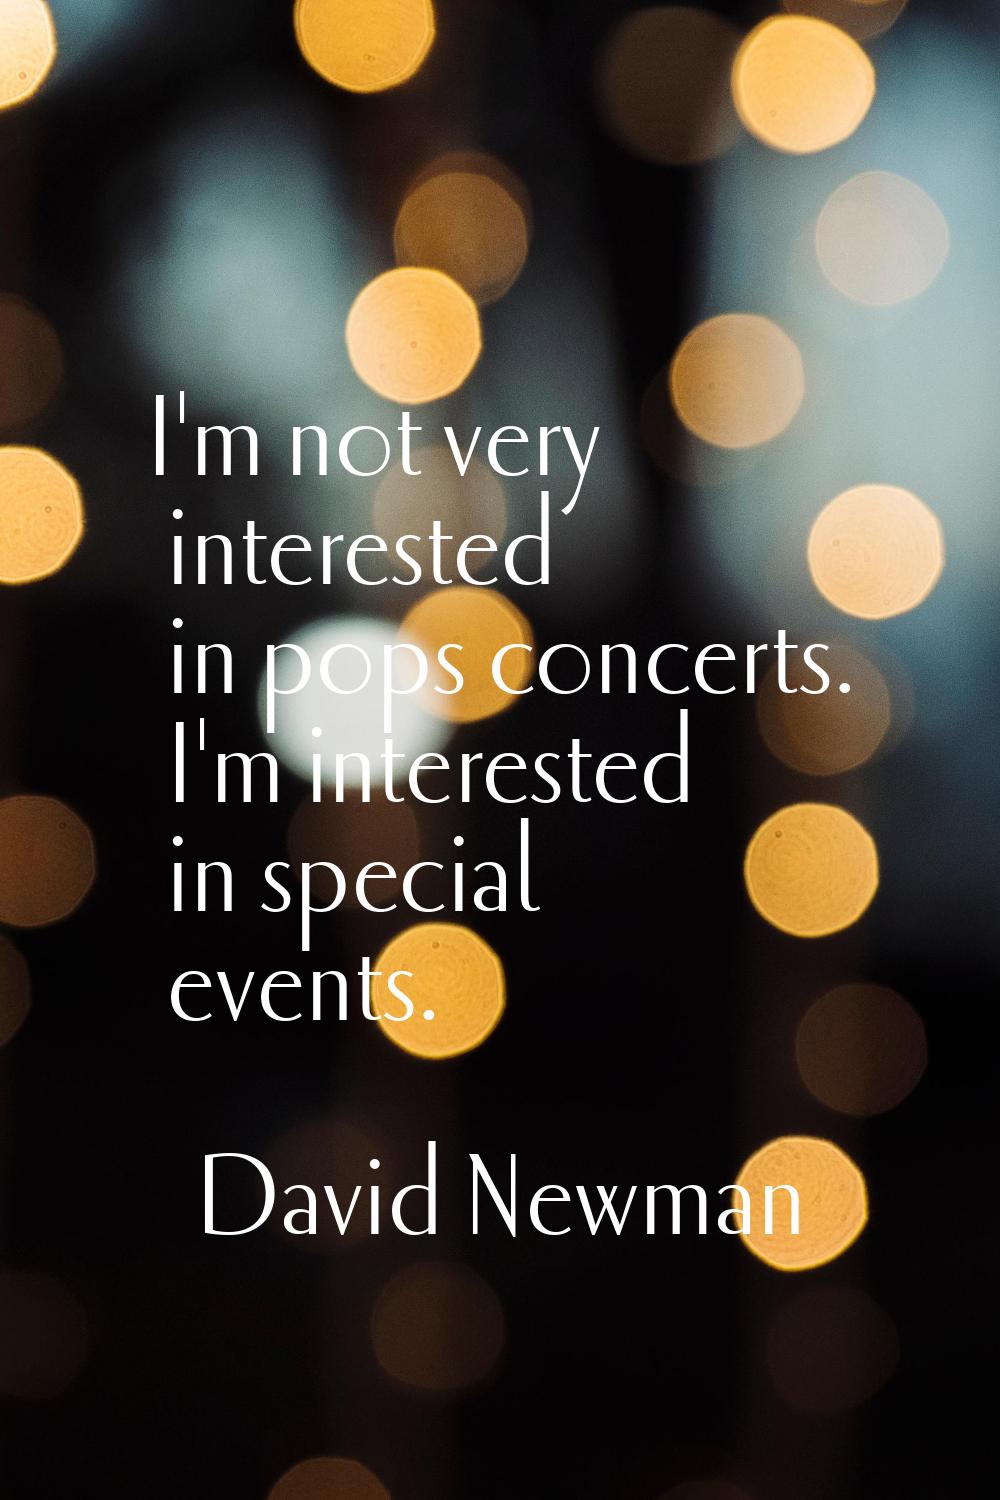 I'm not very interested in pops concerts. I'm interested in special events.